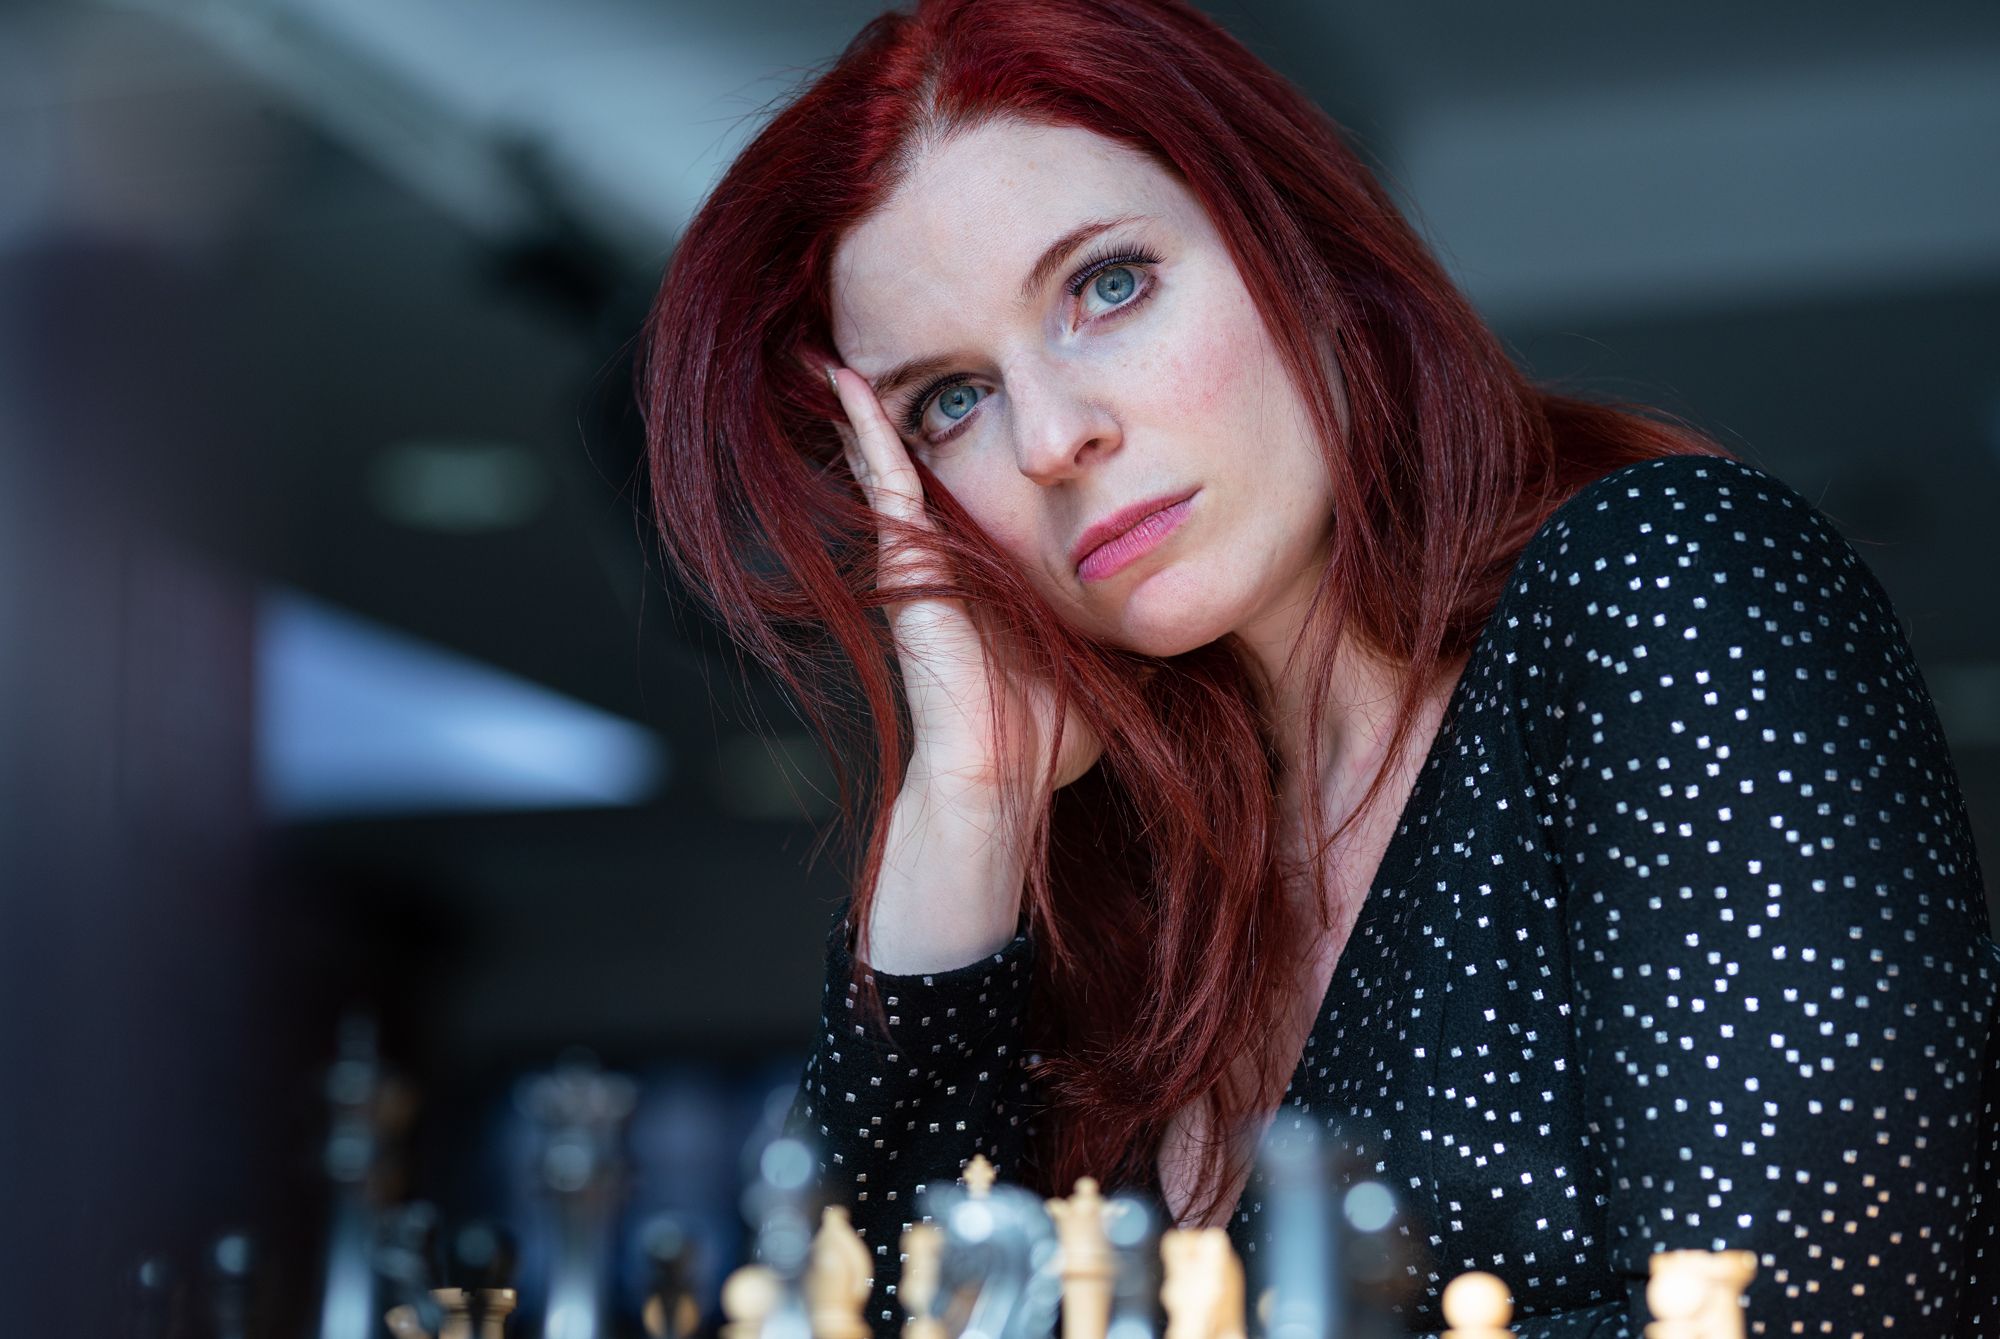 Anna Cramling: Being a woman in chess can feel 'lonely' says popular  streamer